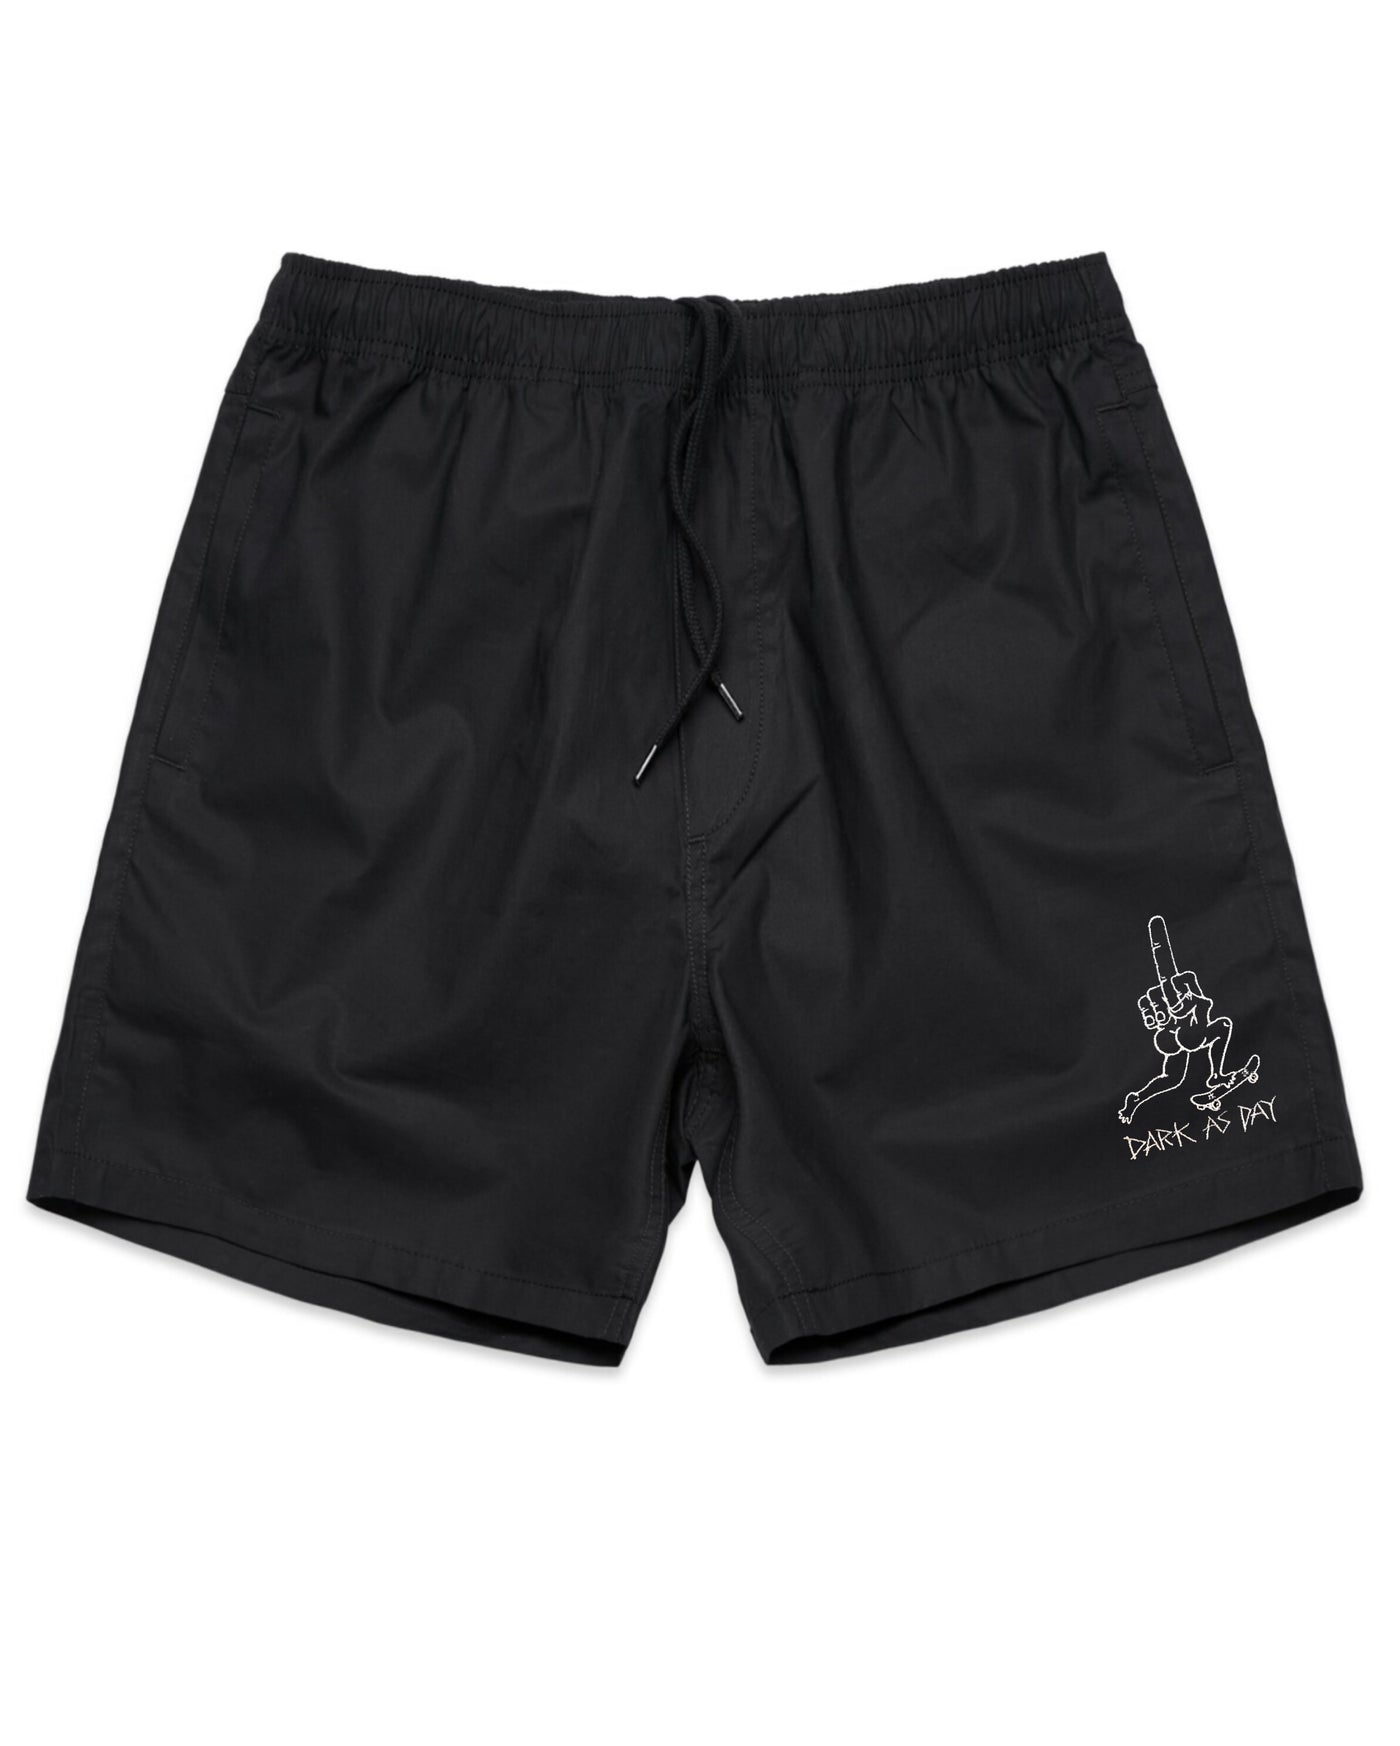 Middle Finger Beach Shorts